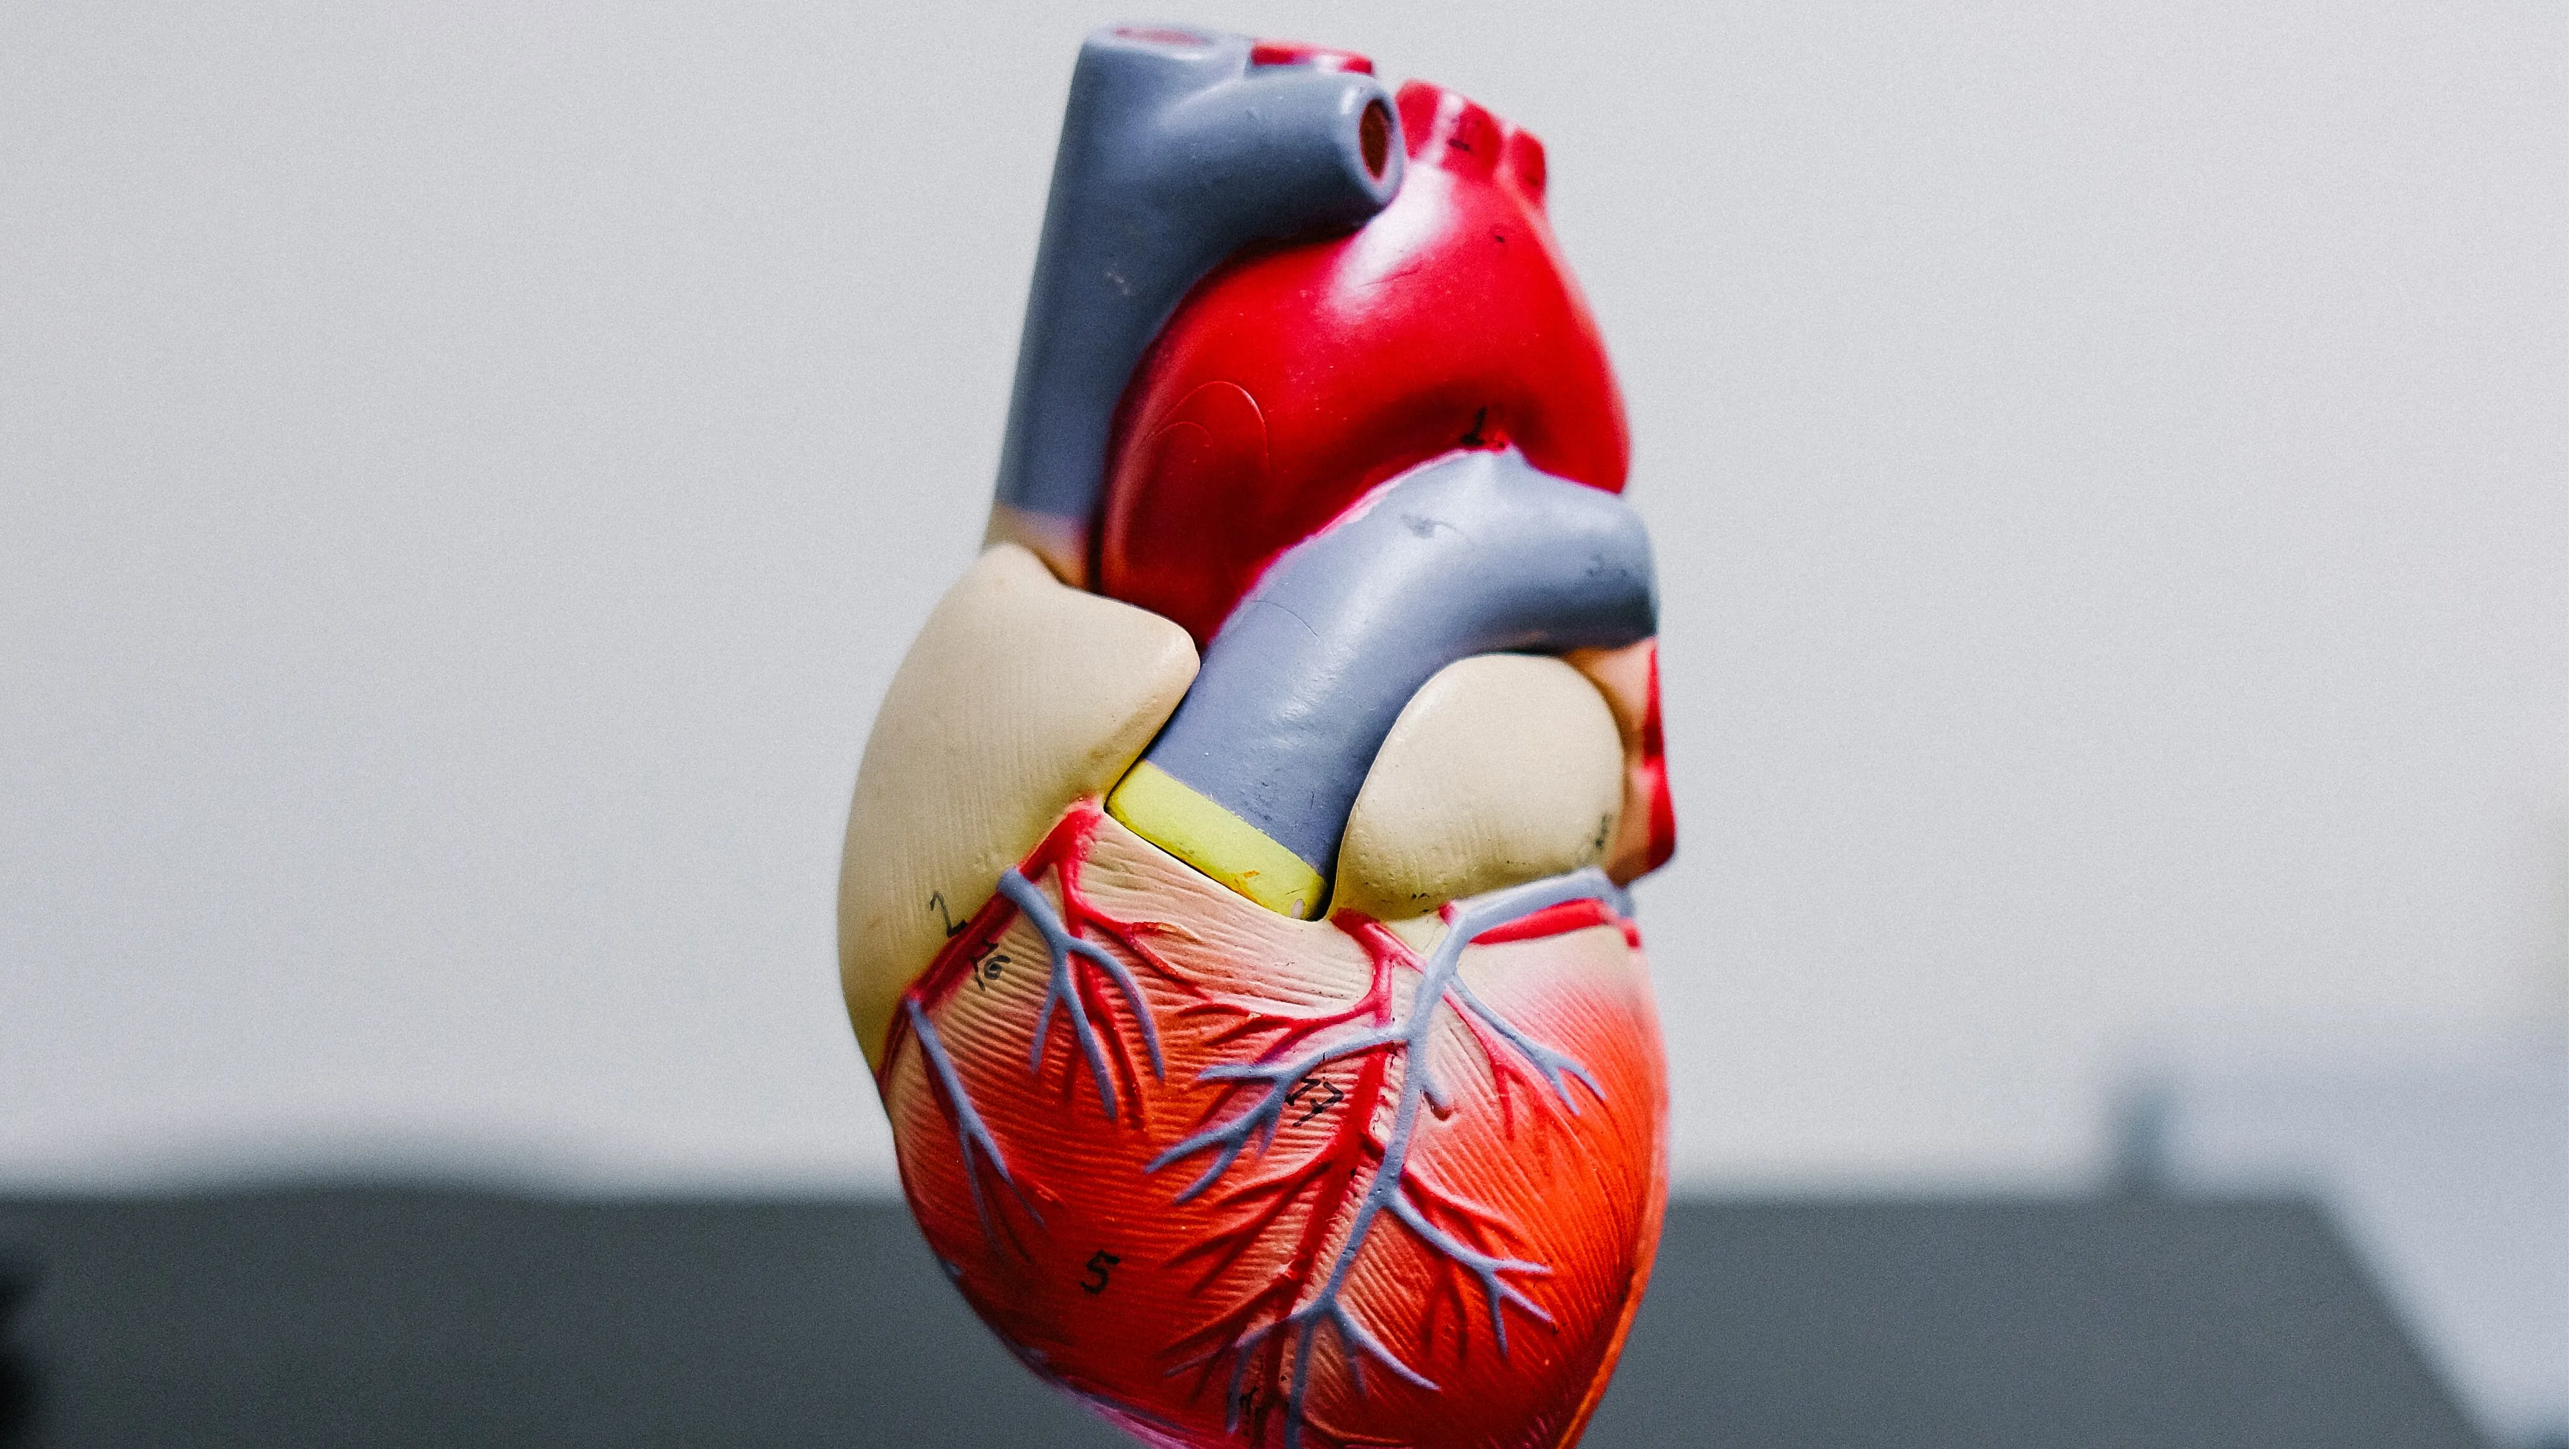 Fat or slim, fatty heart can impact anyone. Here’s how to avoid it